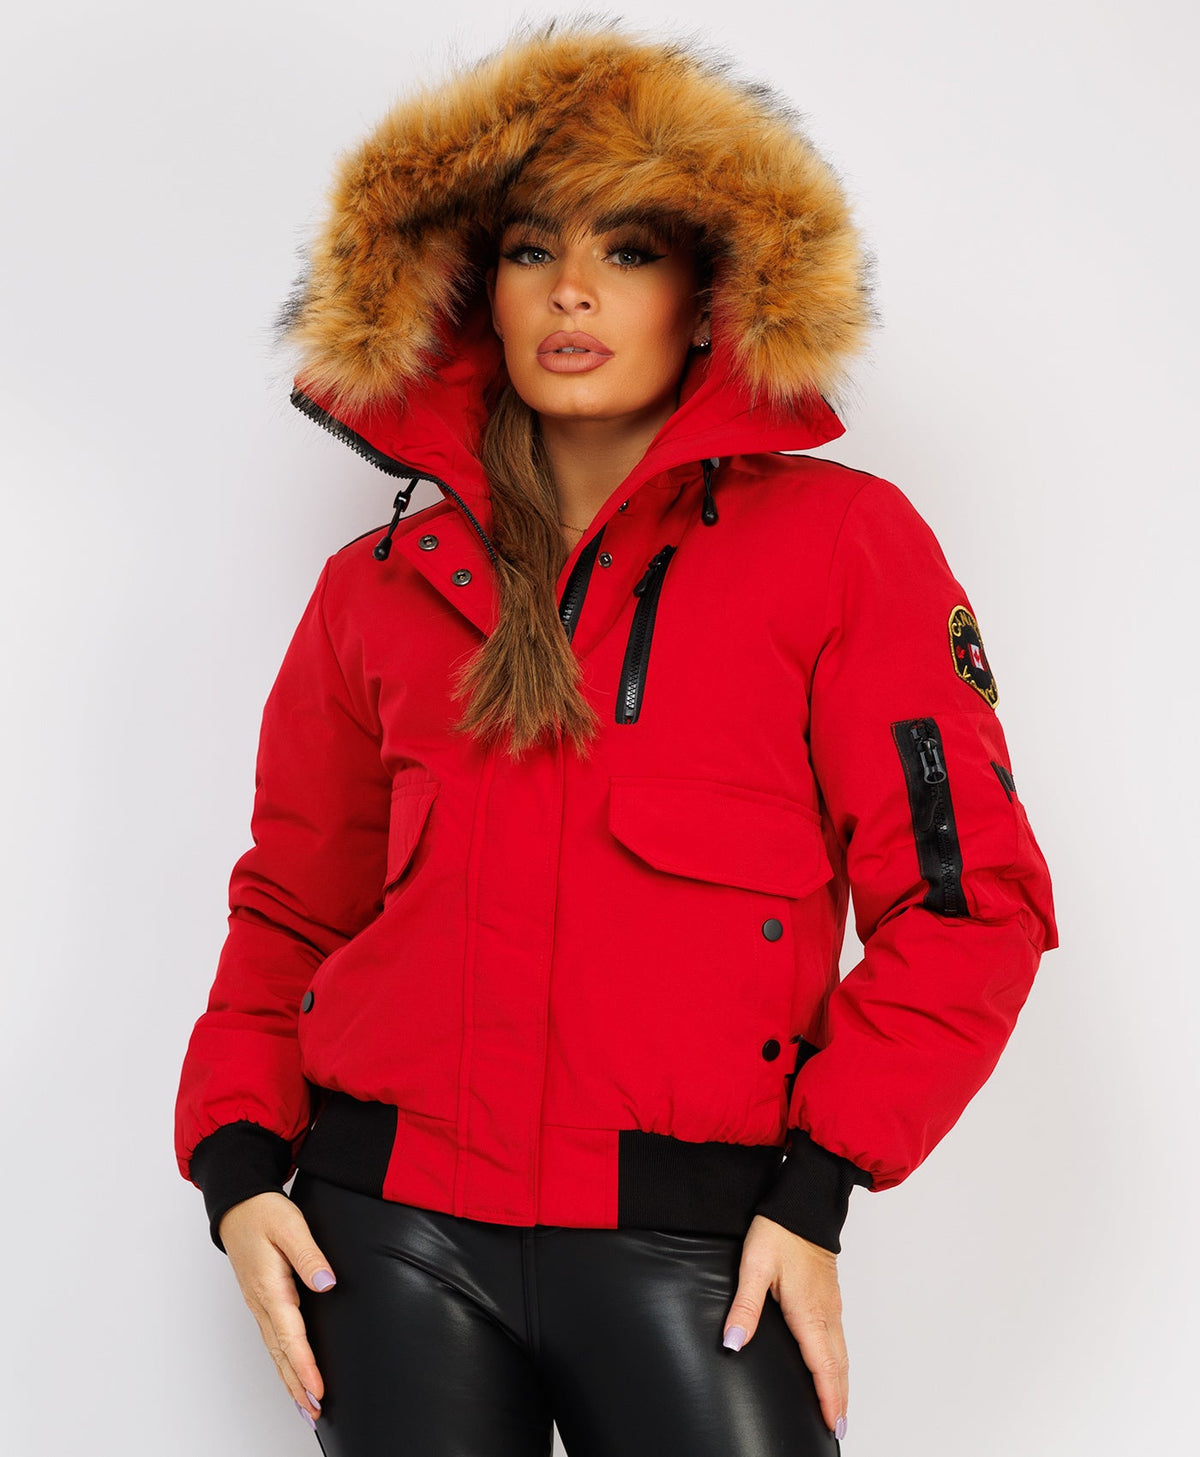 Canada-Bomber-Jacket-With-Fur-Hood-Red-5